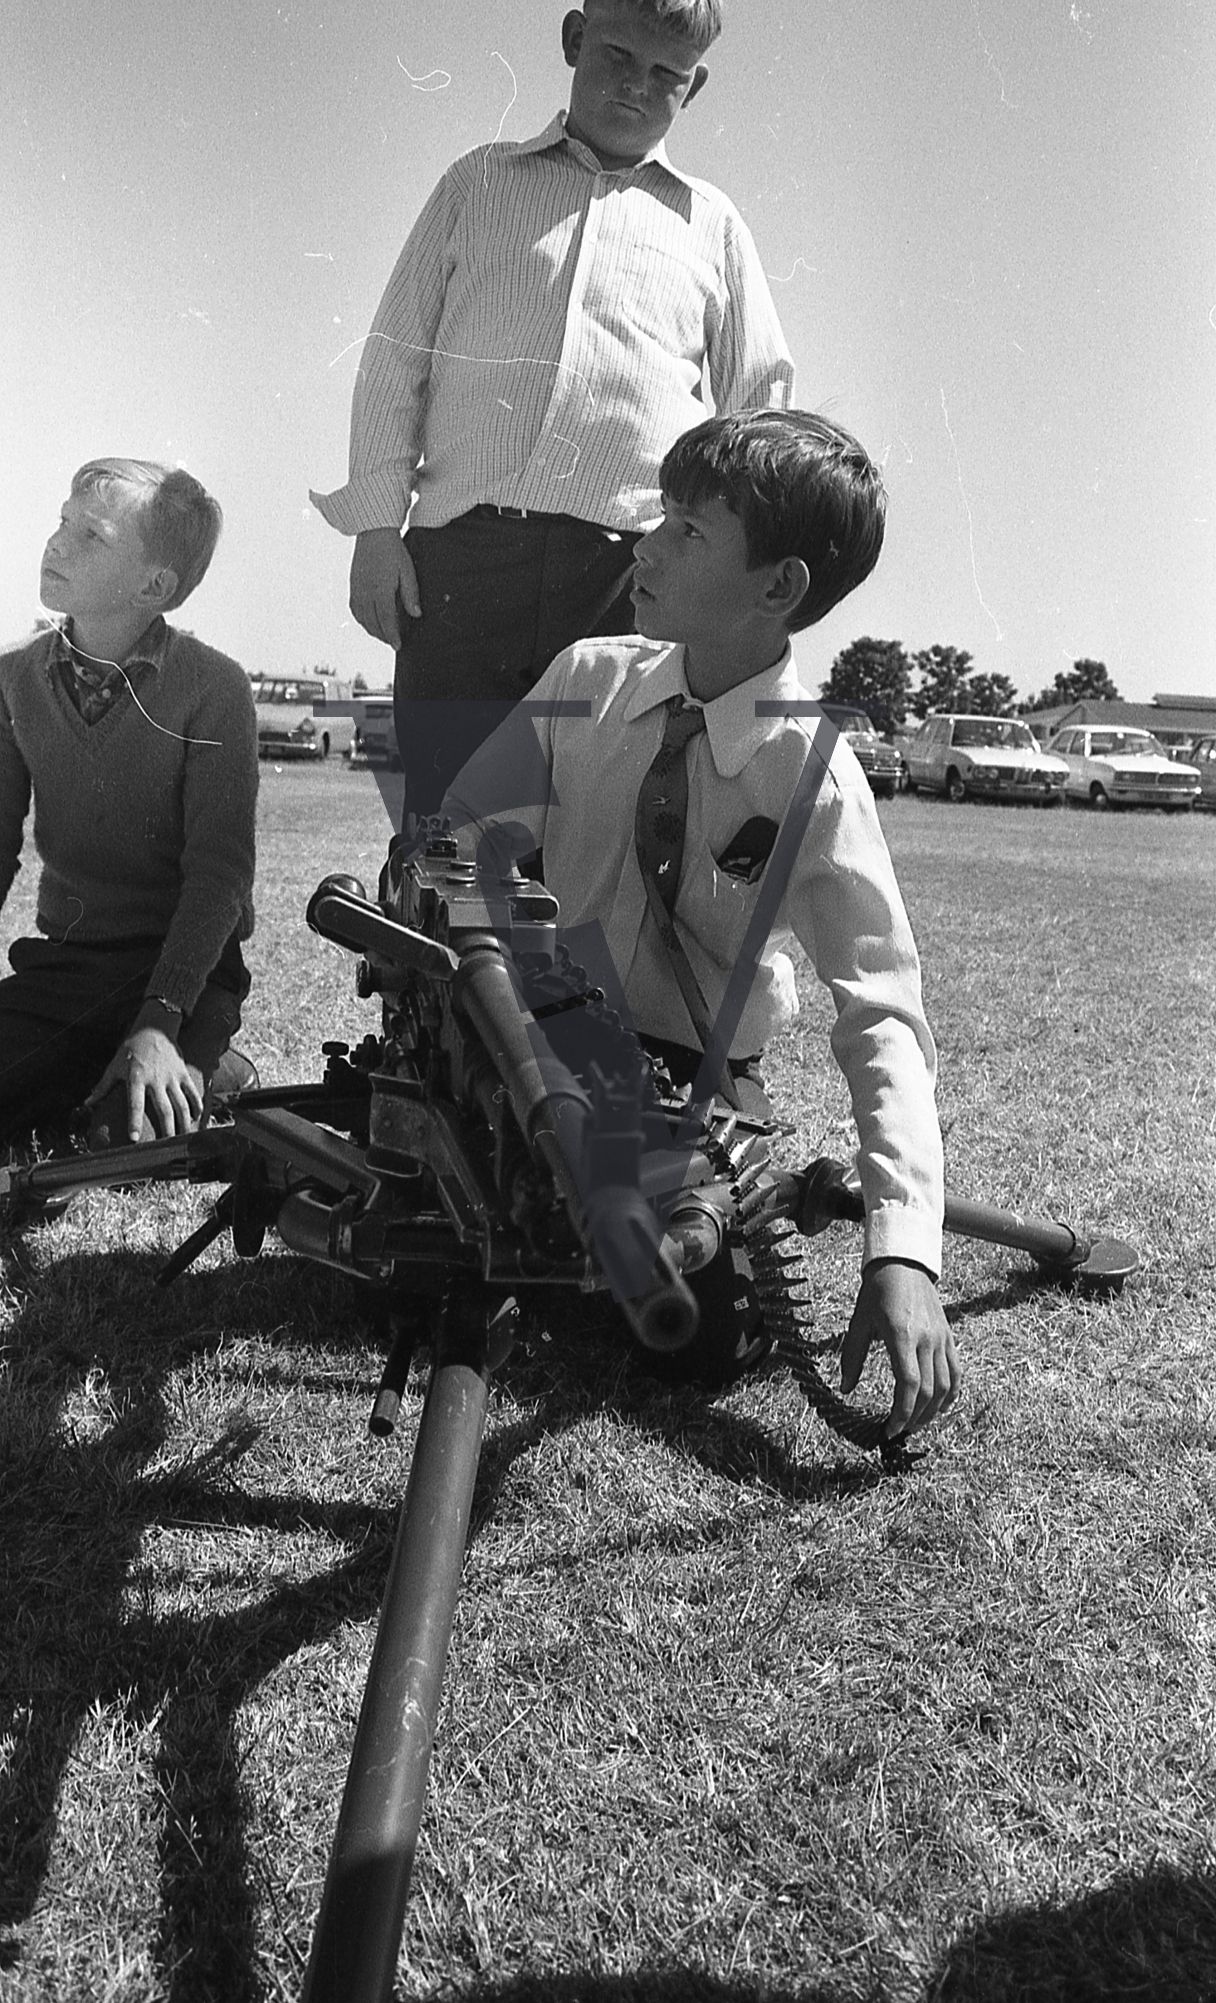 Rhodesia, Rhodesian Light Infantry, passing out ceremony, young boys with tripod mounted FN MAG general purpose machine gun.